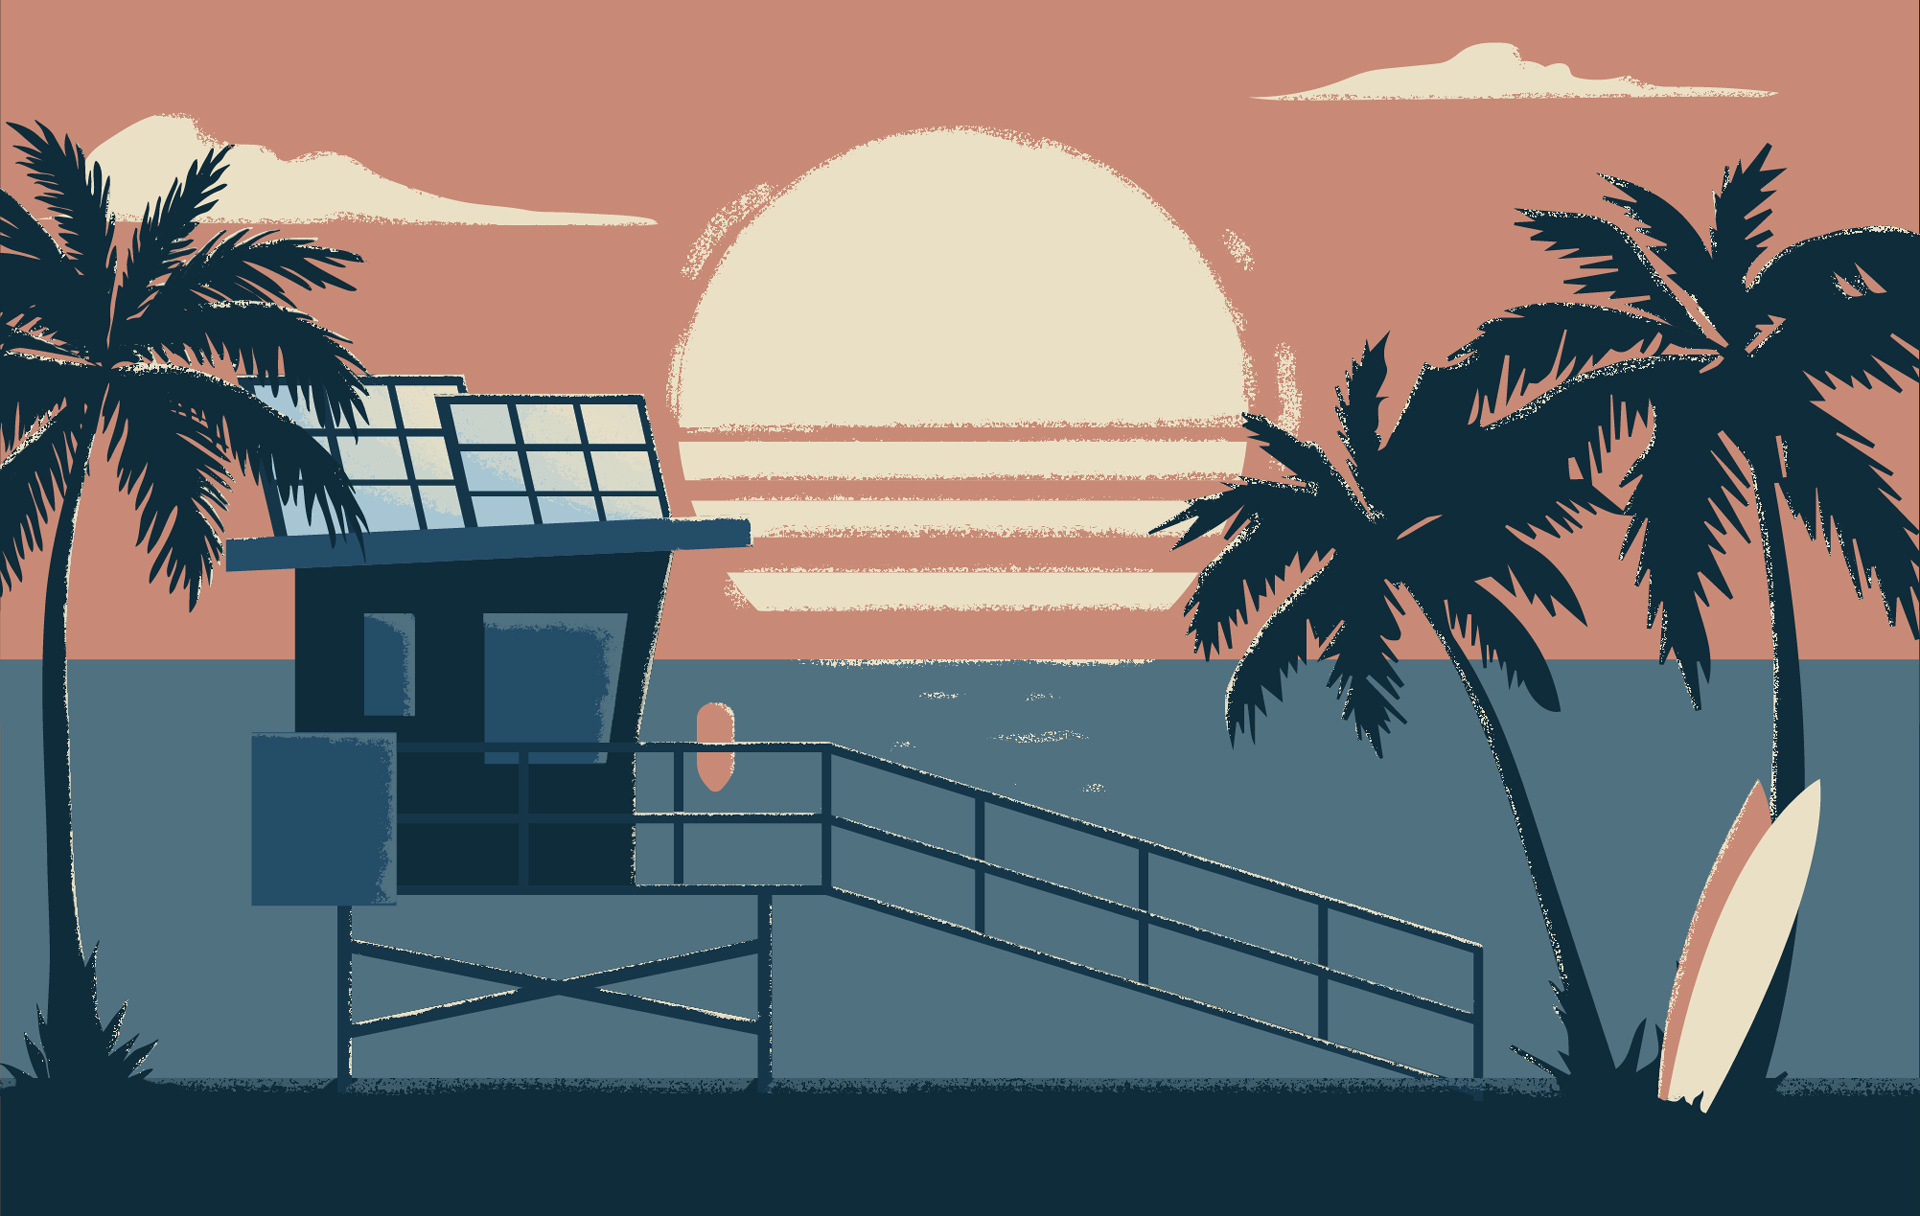 A sunset scene on a beach in California, with solar panels atop the lifeguard hut.